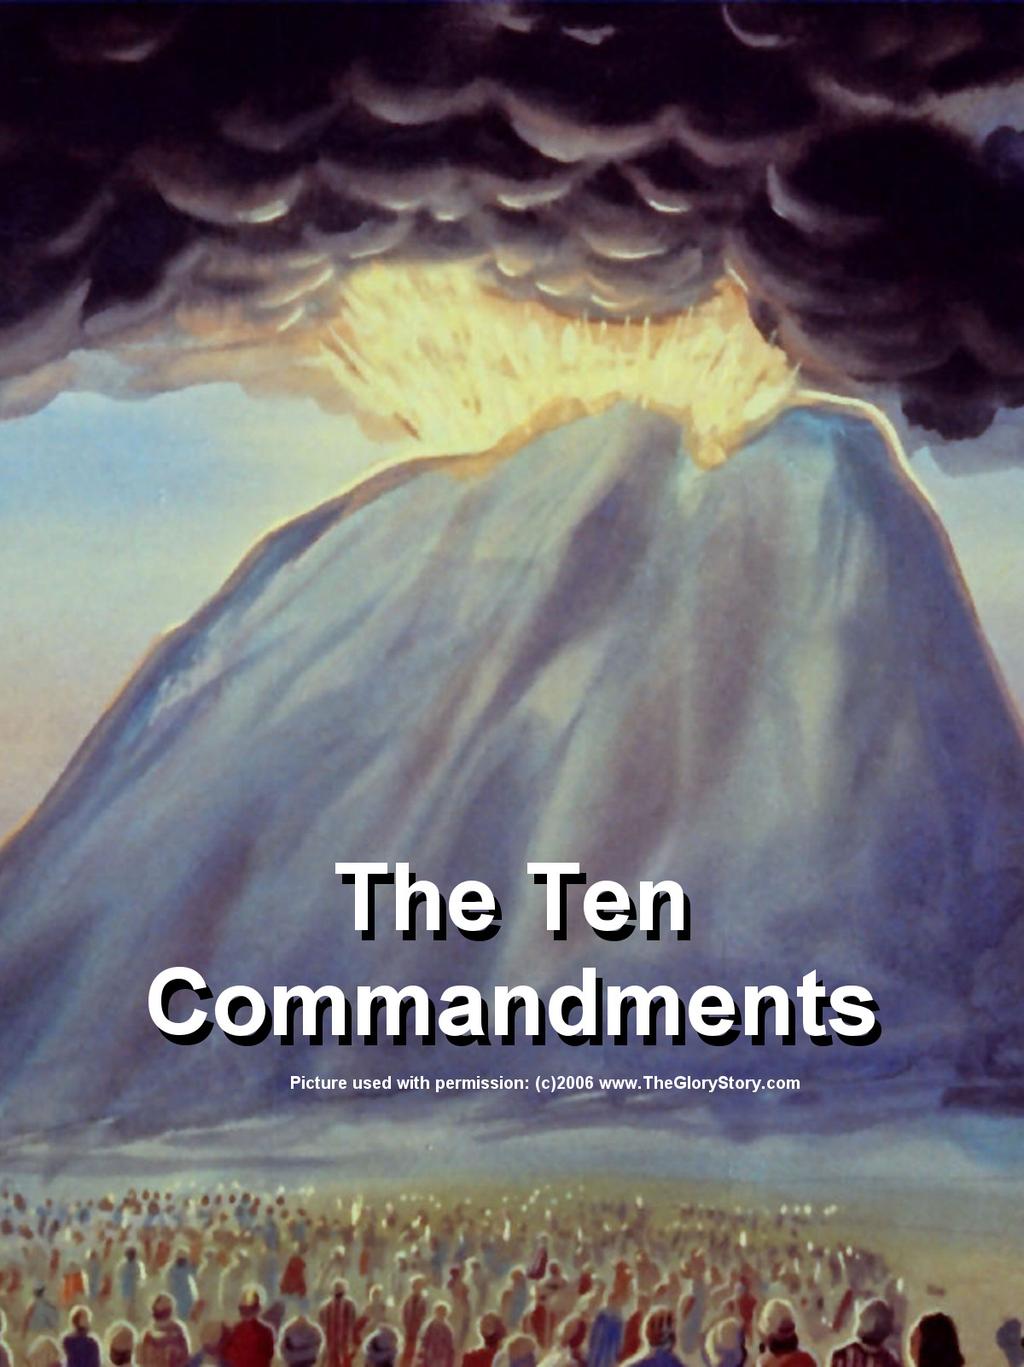 http://www.readyanswers.org Unit B The Ten Commandments Bill and Shelley Houser We have assembled this work to further the kingdom of Jesus Christ.